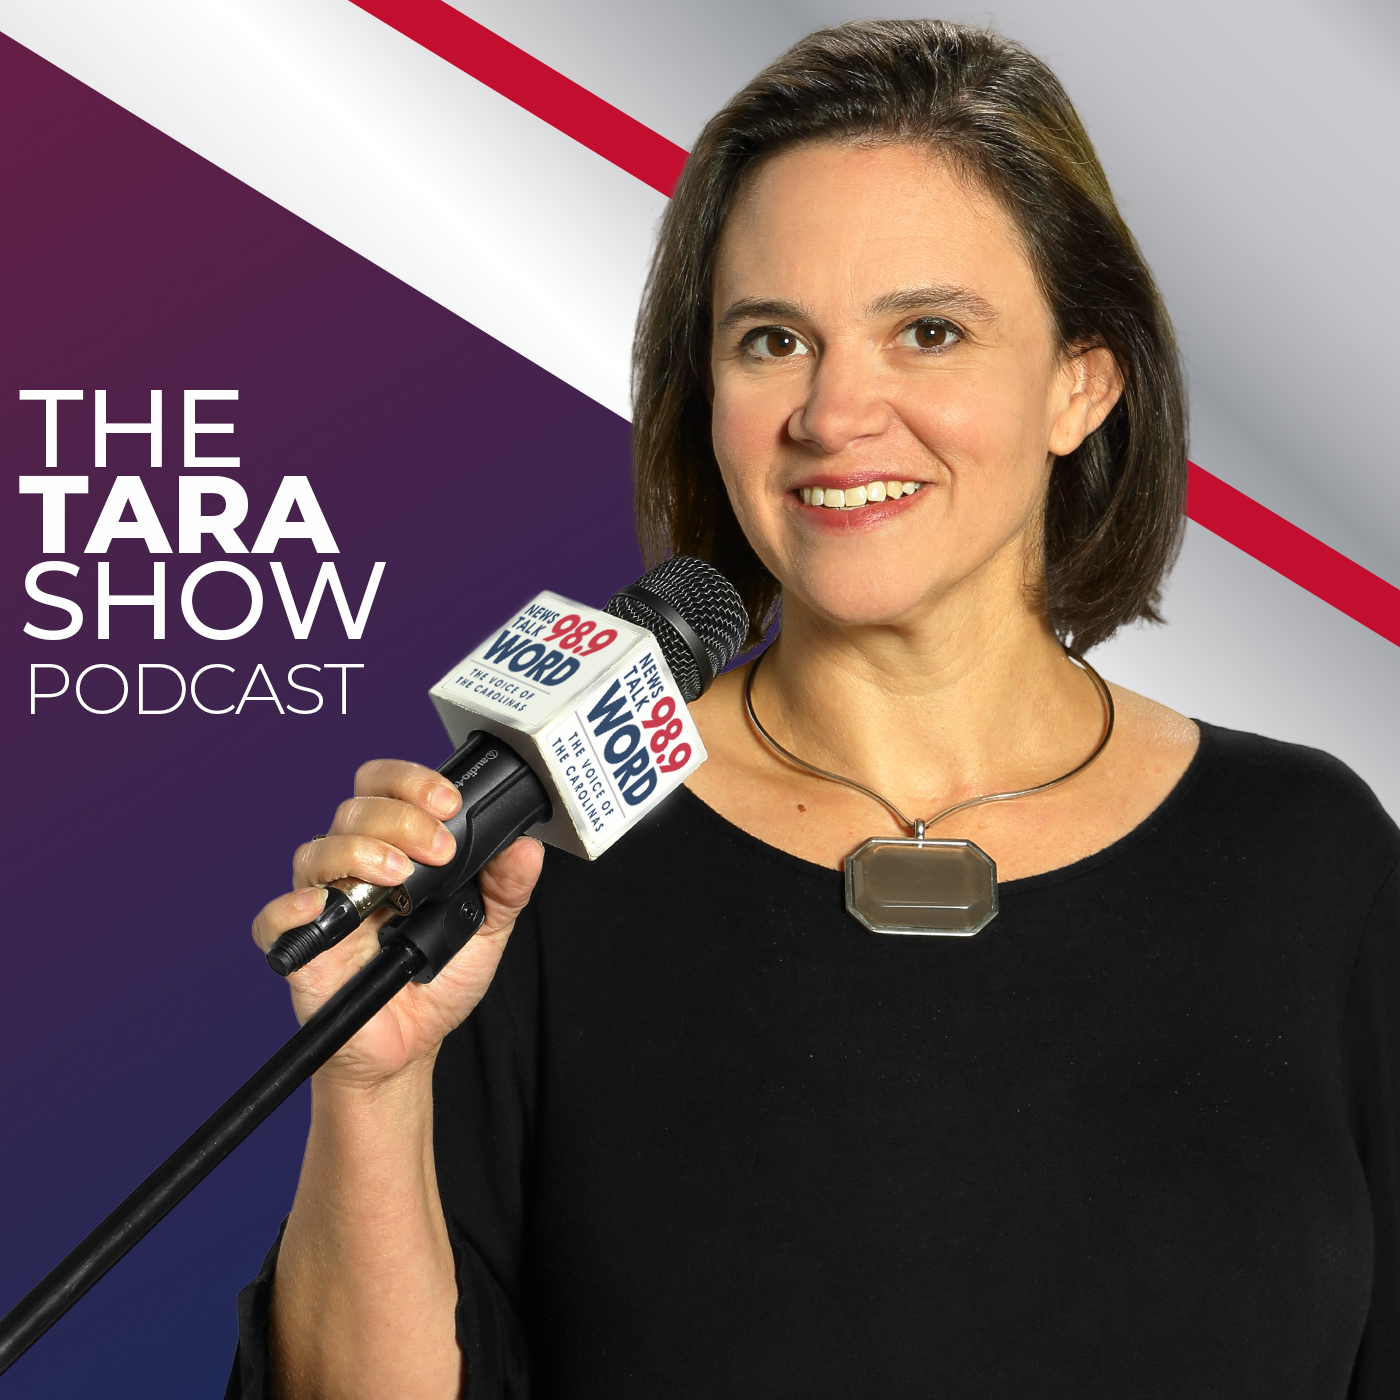 Hour 1: The Tara Show - “Welcome Ryan Wrecker to fill in for Tara” “Stand against Sexua Books in Schools” “Protecting the Children from Predators” “Gateway Drugs” 